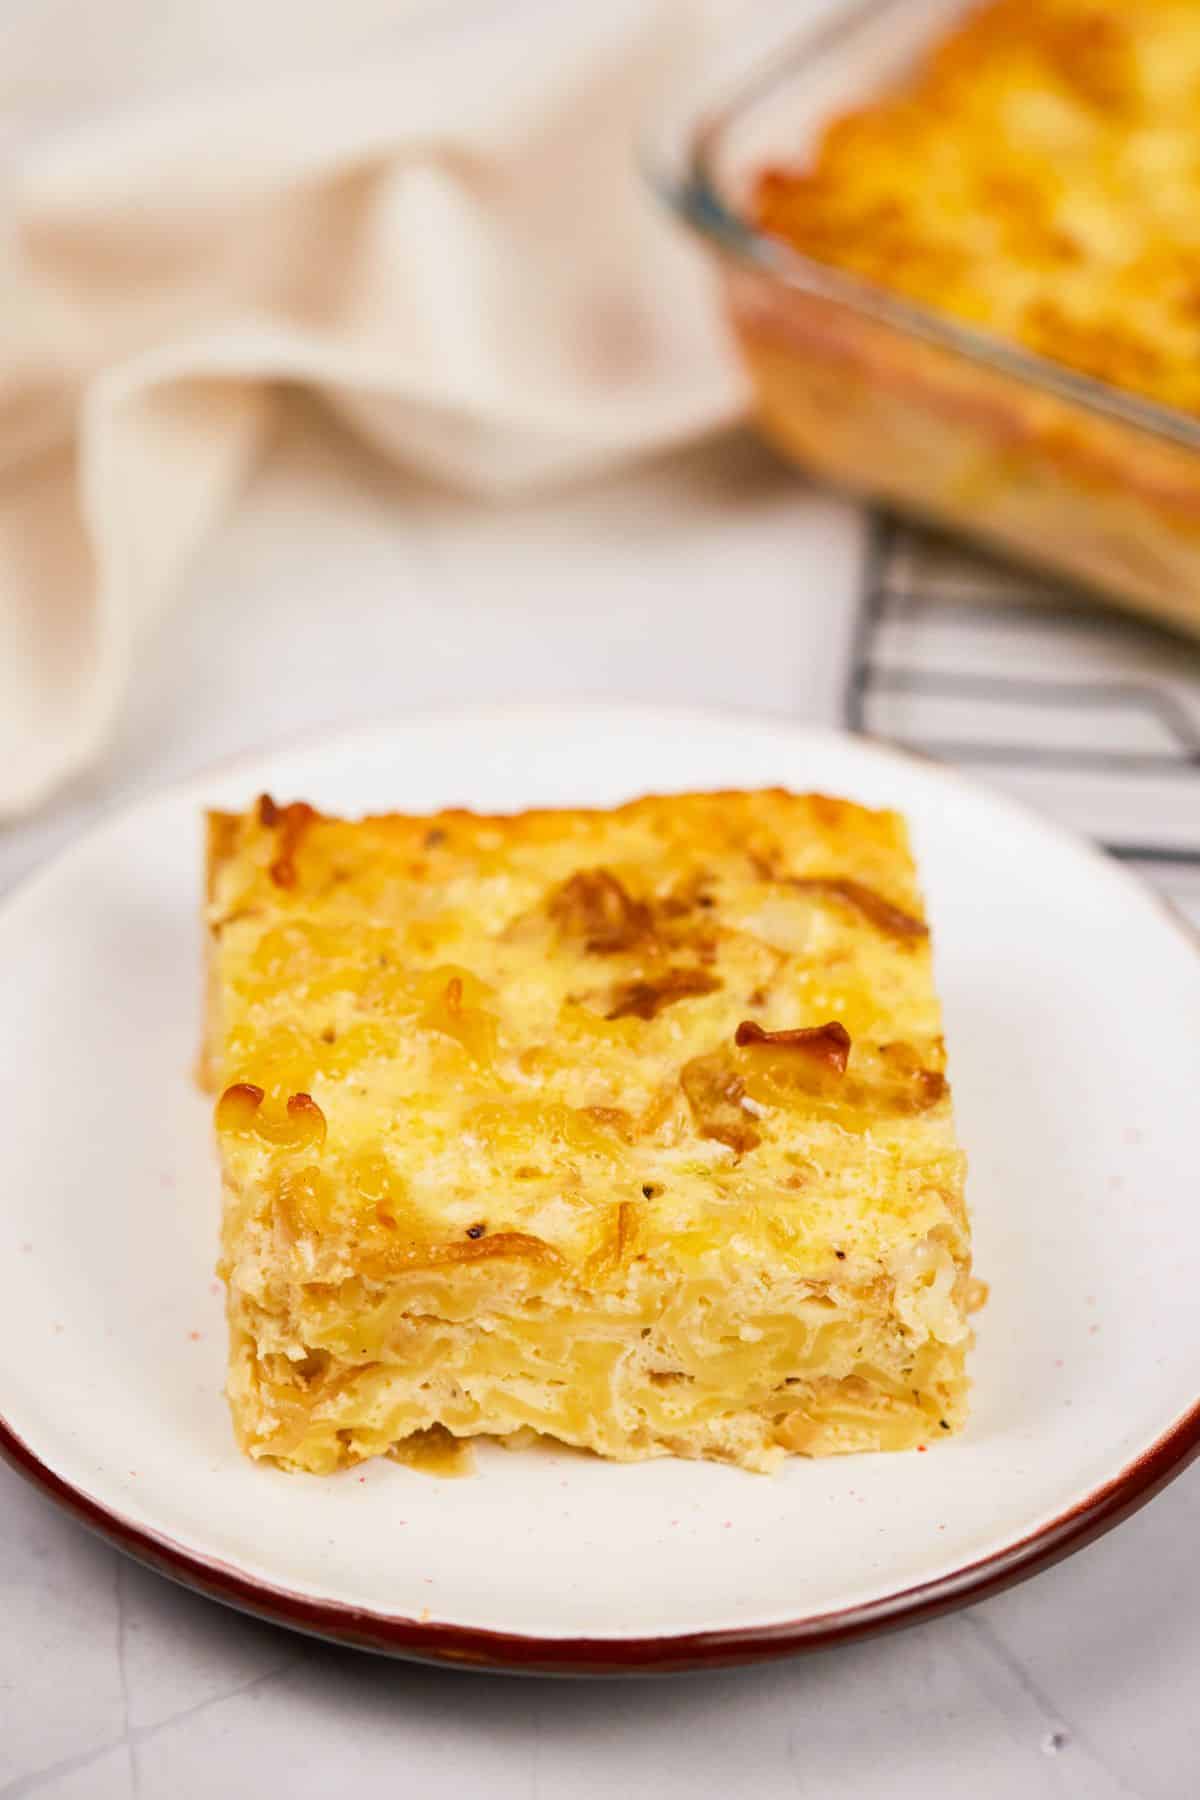 square slice of noodle kugel bake on round white plate by glass baking dish